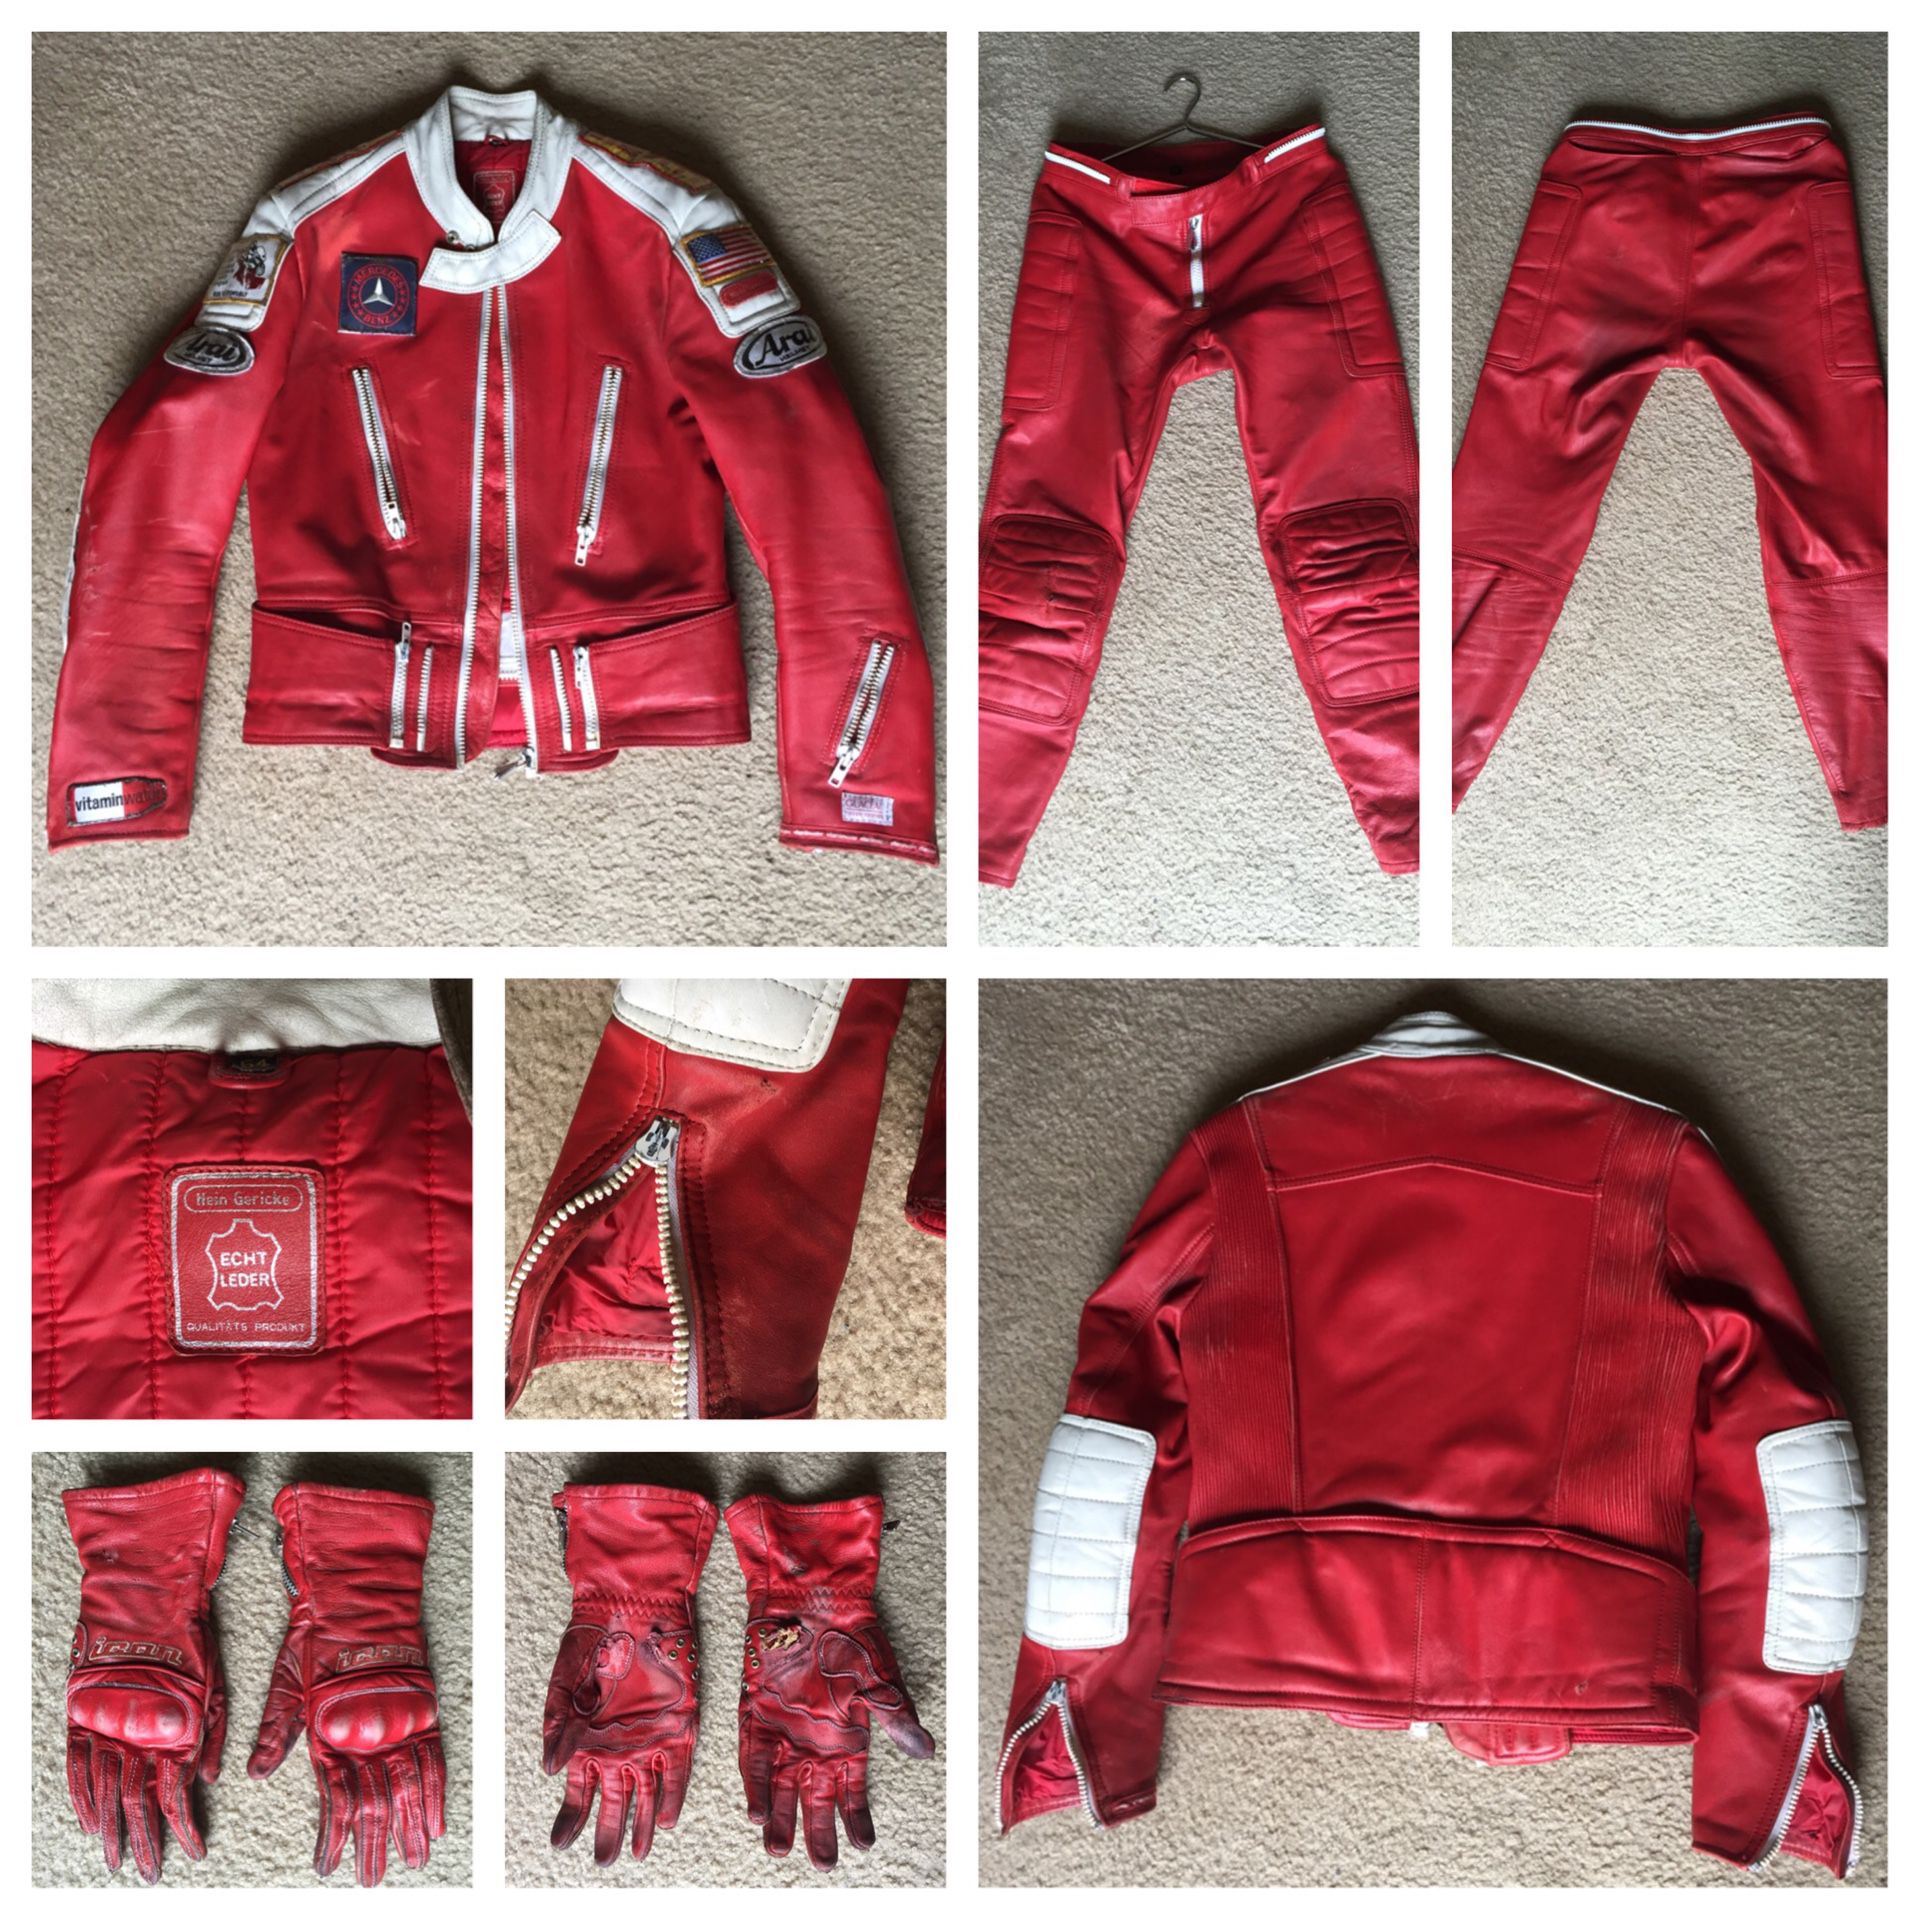 Rare 1970’s Red/White Hein Gericke Motorcycle Race Suit